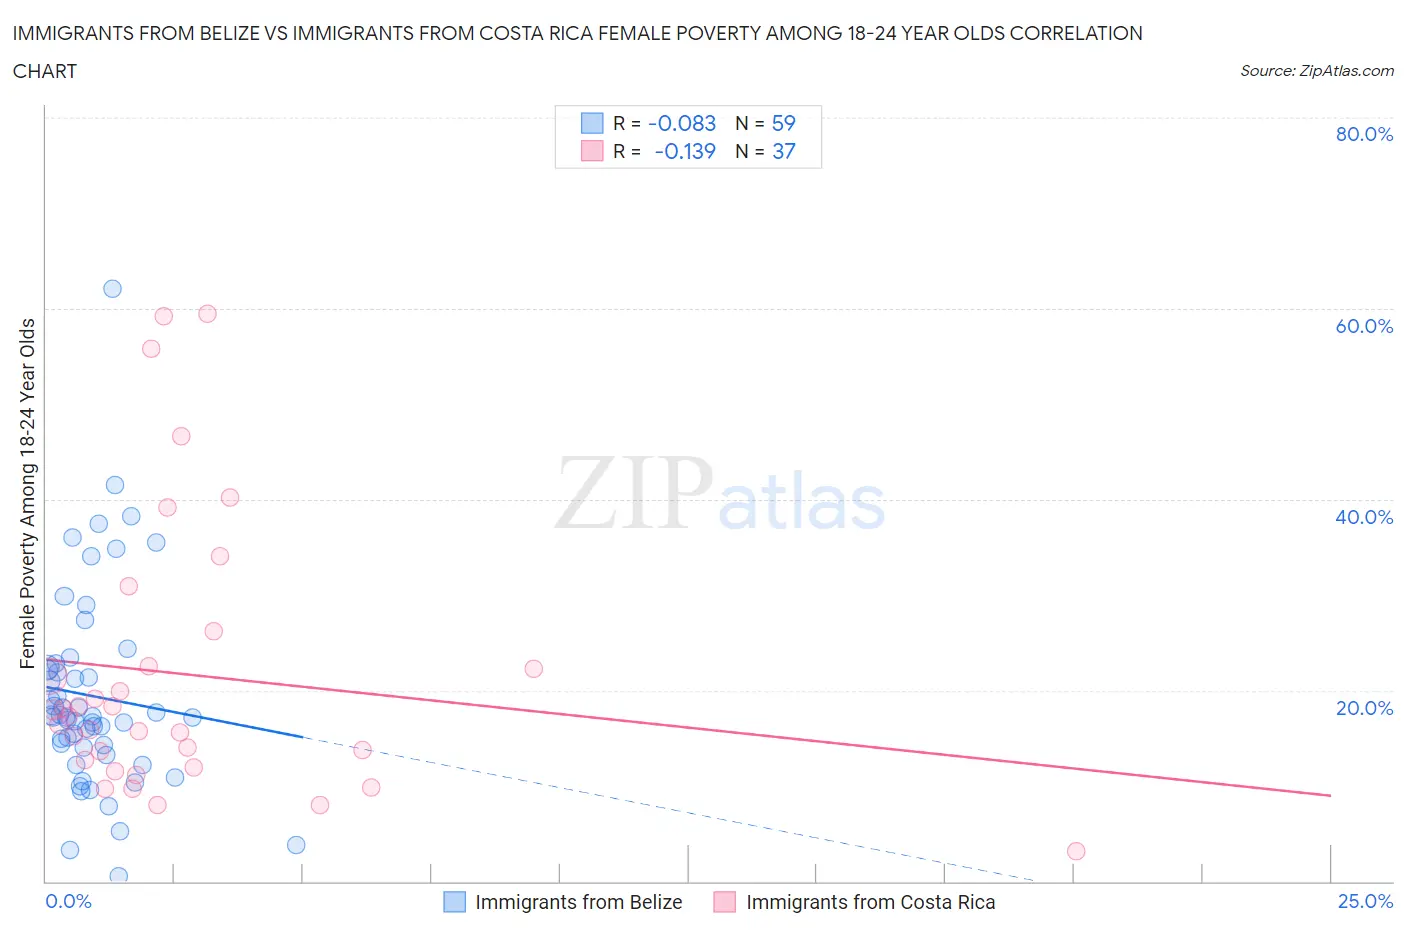 Immigrants from Belize vs Immigrants from Costa Rica Female Poverty Among 18-24 Year Olds